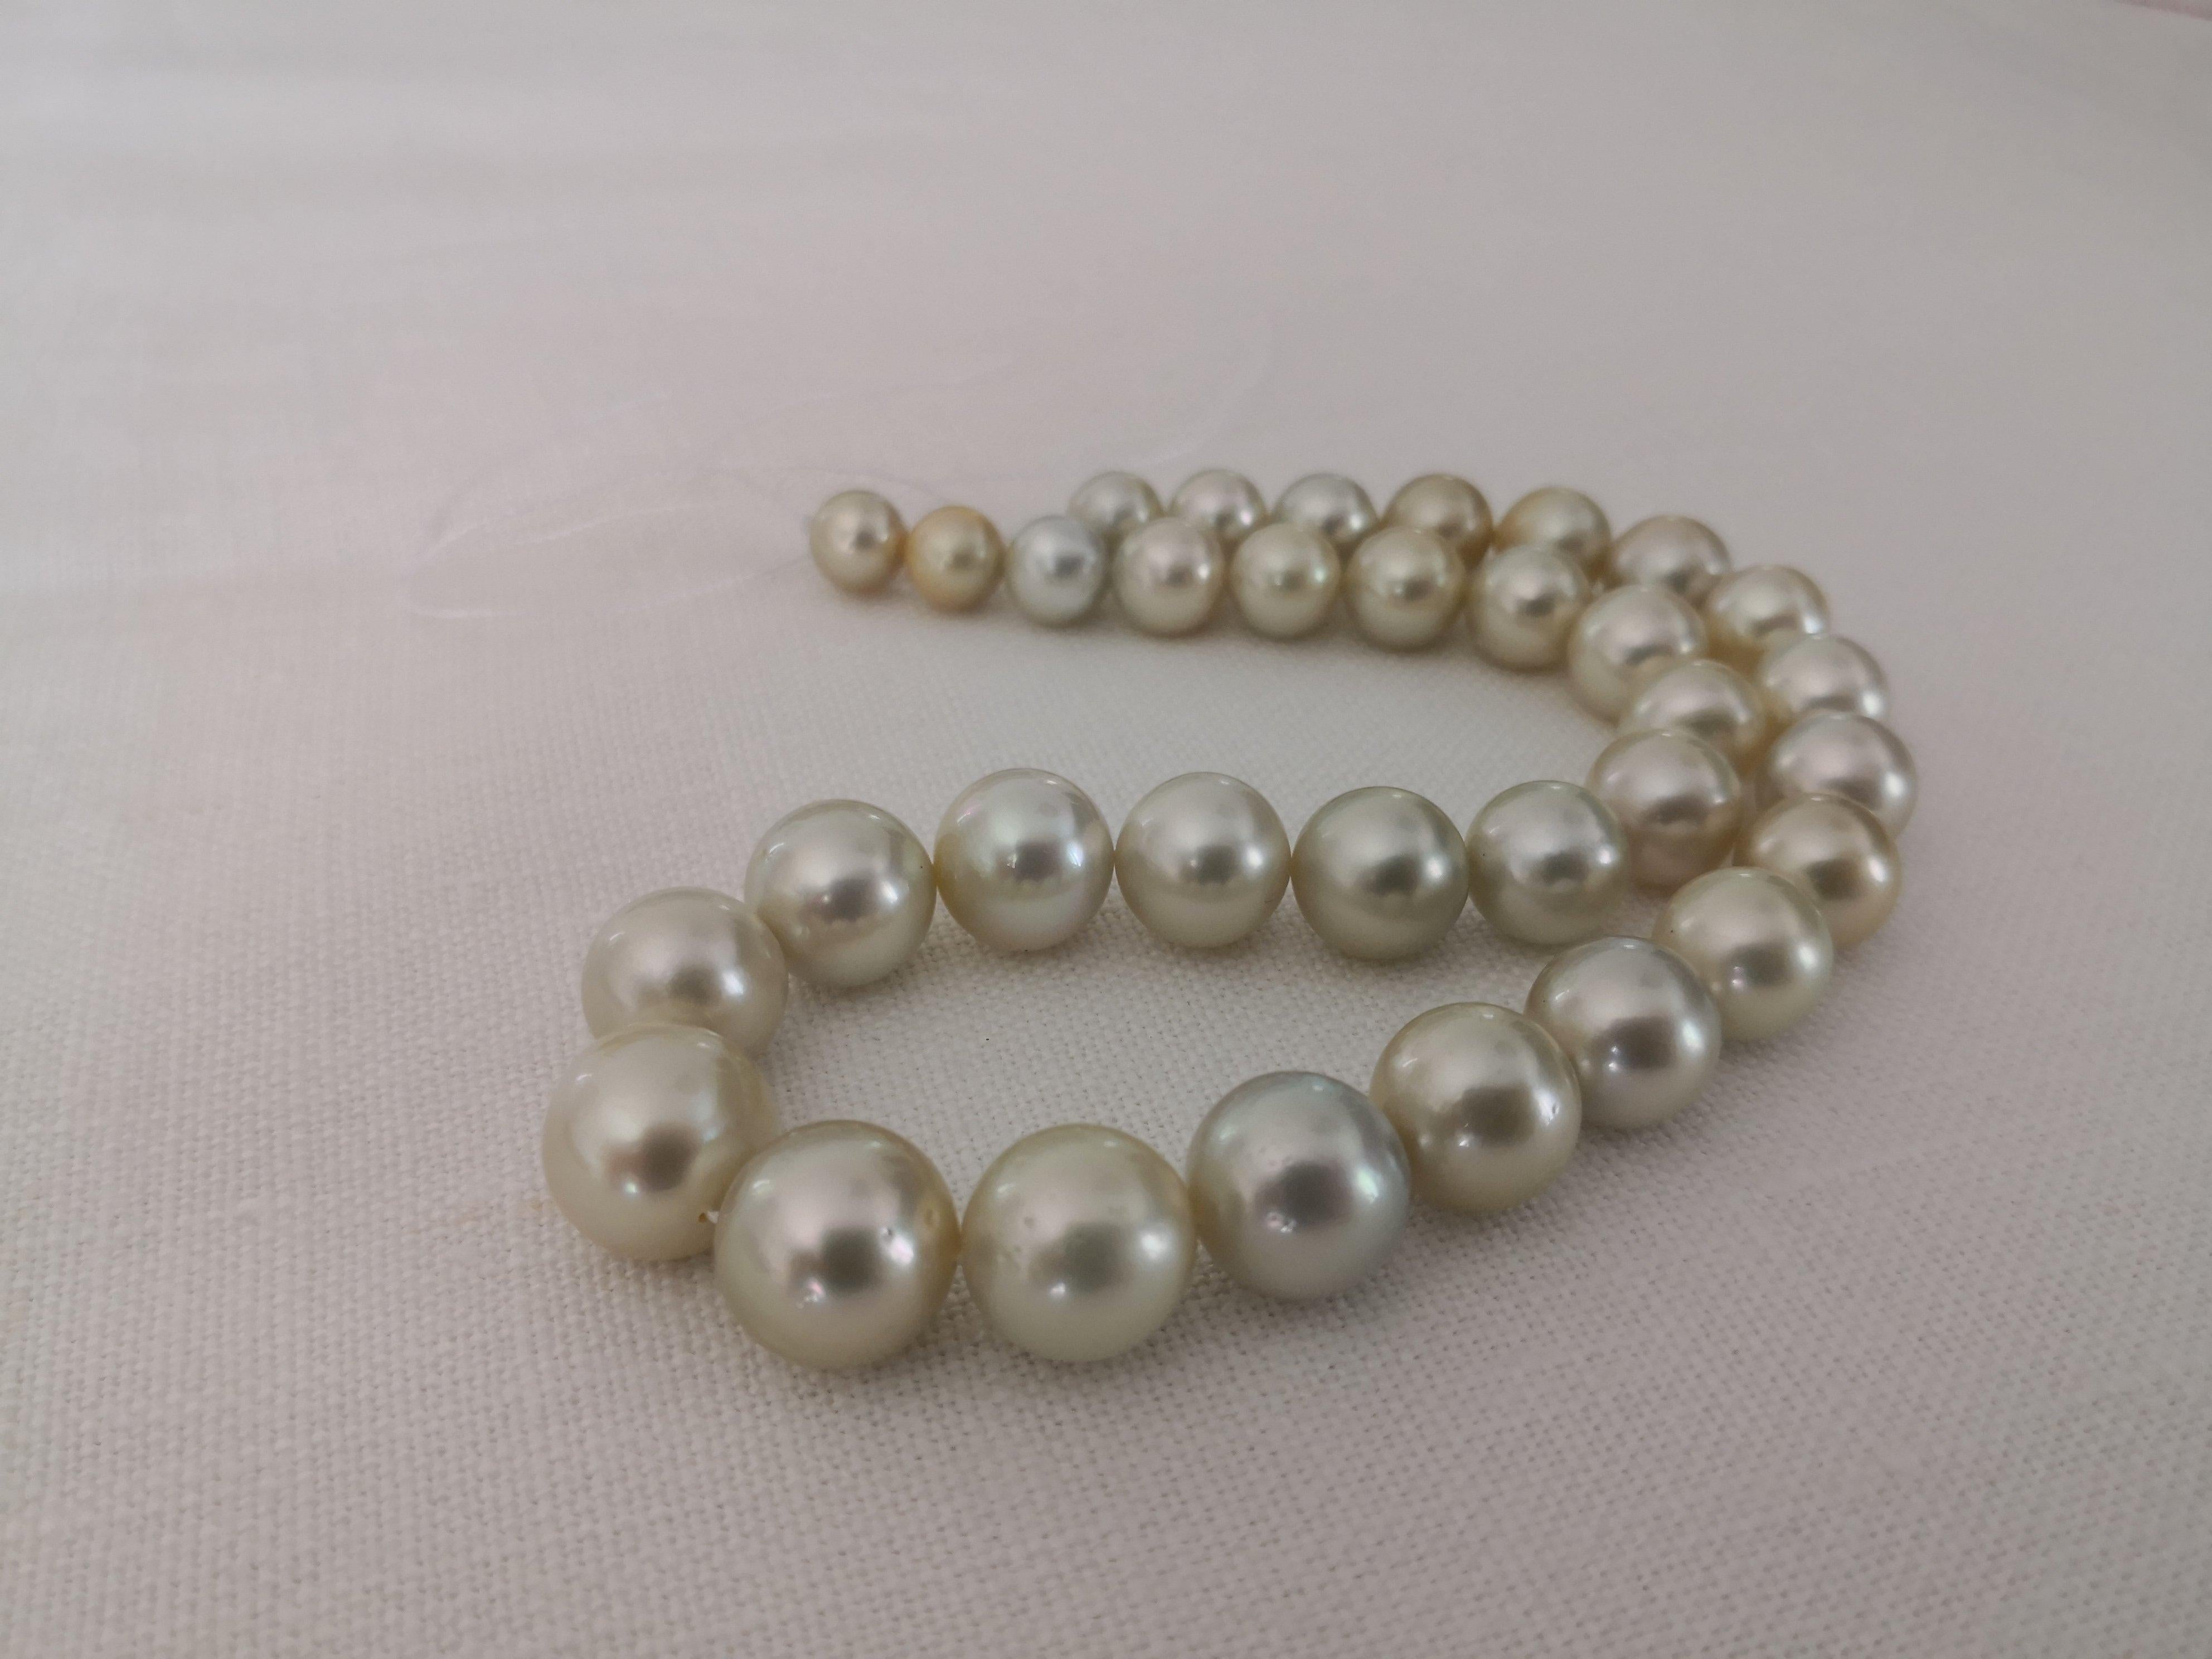 Beautiful Natural Color South Sea Pearls from Indonesia ocean waters.

- Size of Pearls 9-14 mm of diameter

- Pearls from Pinctada Maxima Oyster

- Origin: Indonesia ocean waters

- Natural Golden-Pistacho Color and overtones

- High natural luster